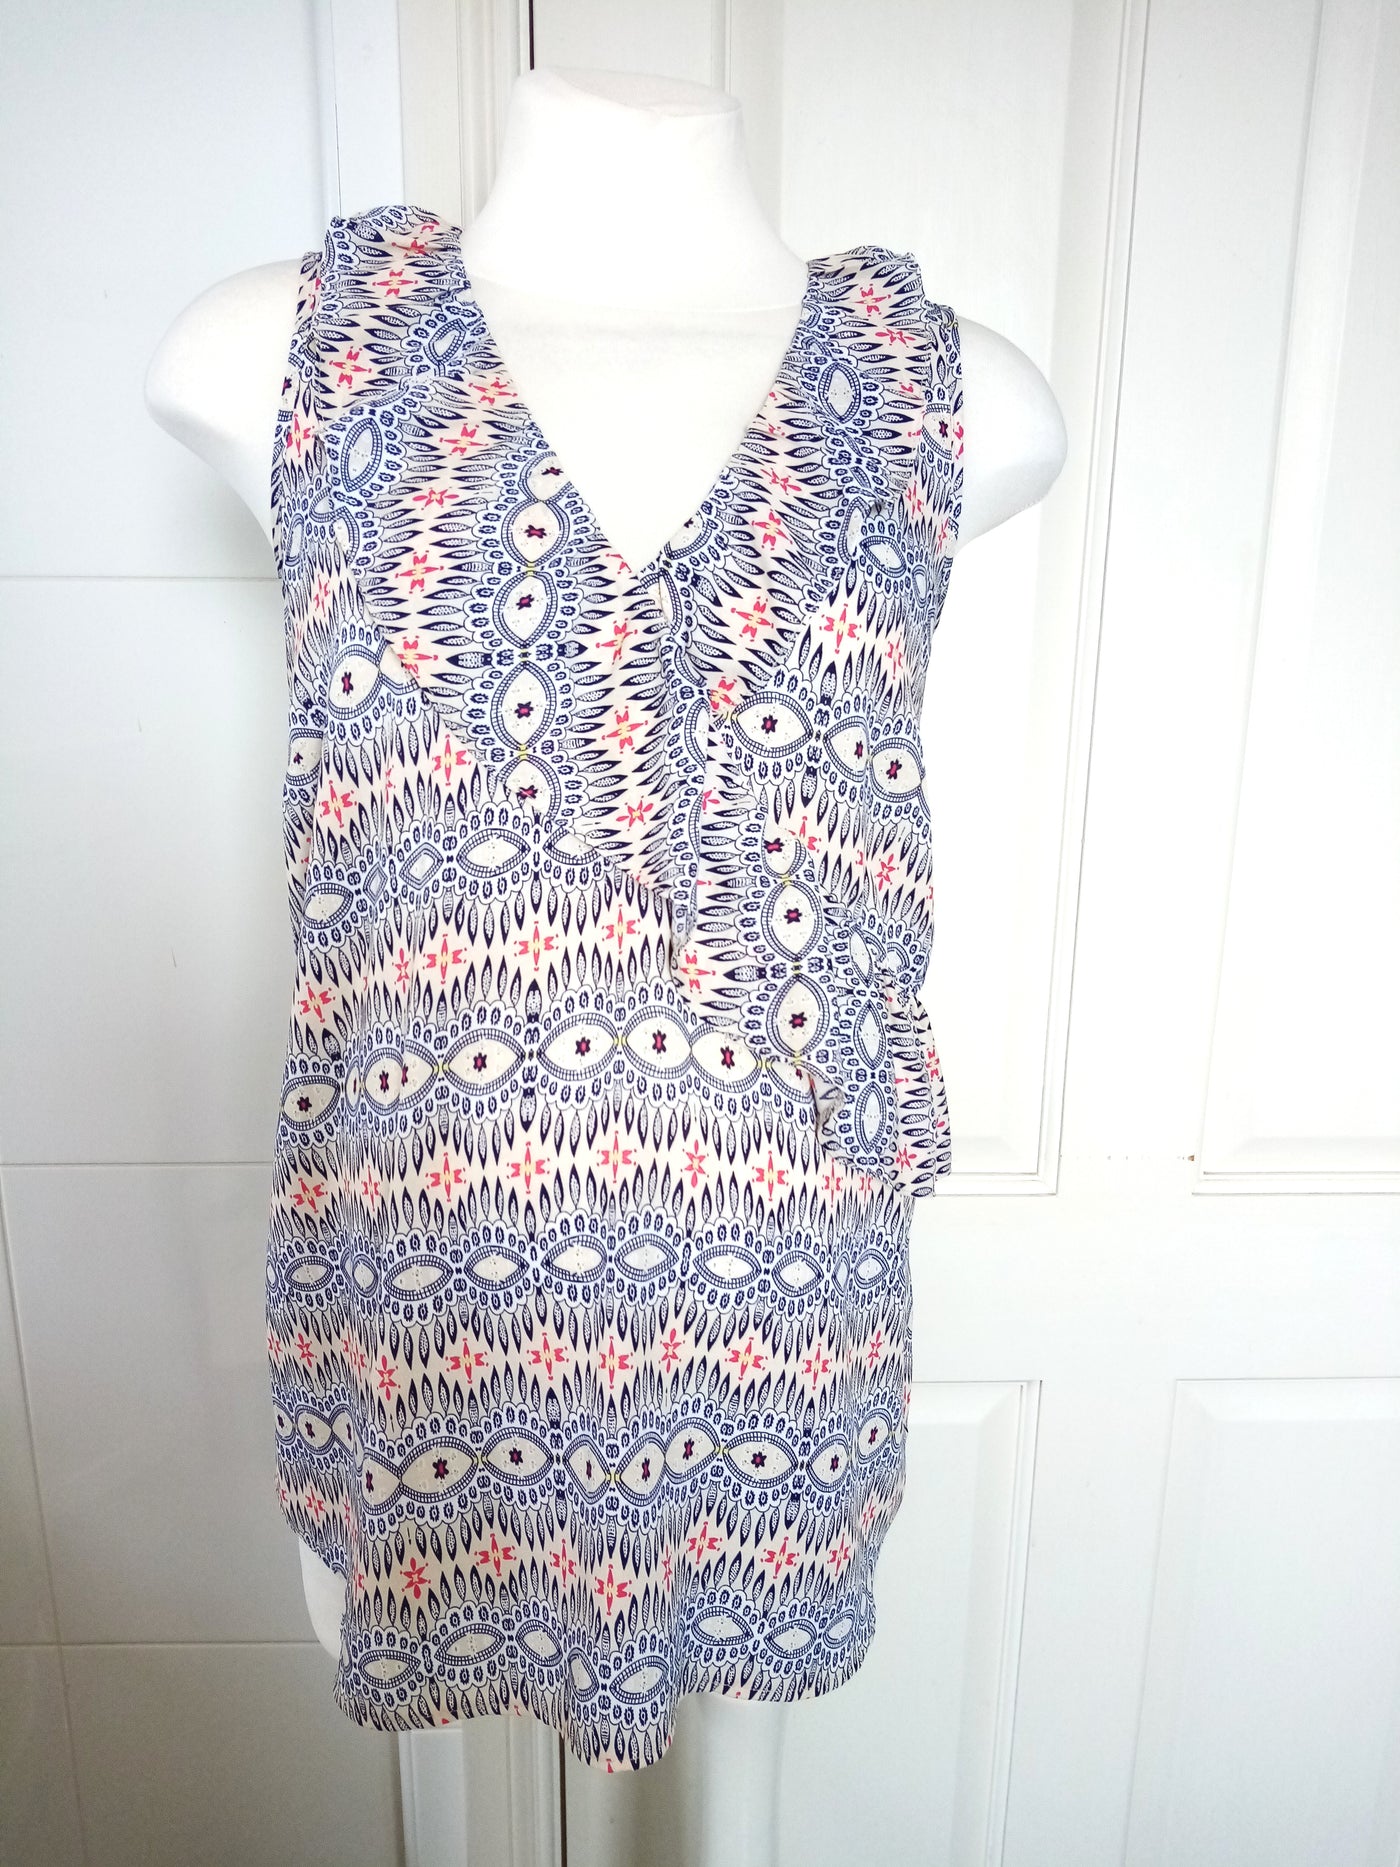 George Sleeveless Frill Top - Size 14 (would fit 12/14)